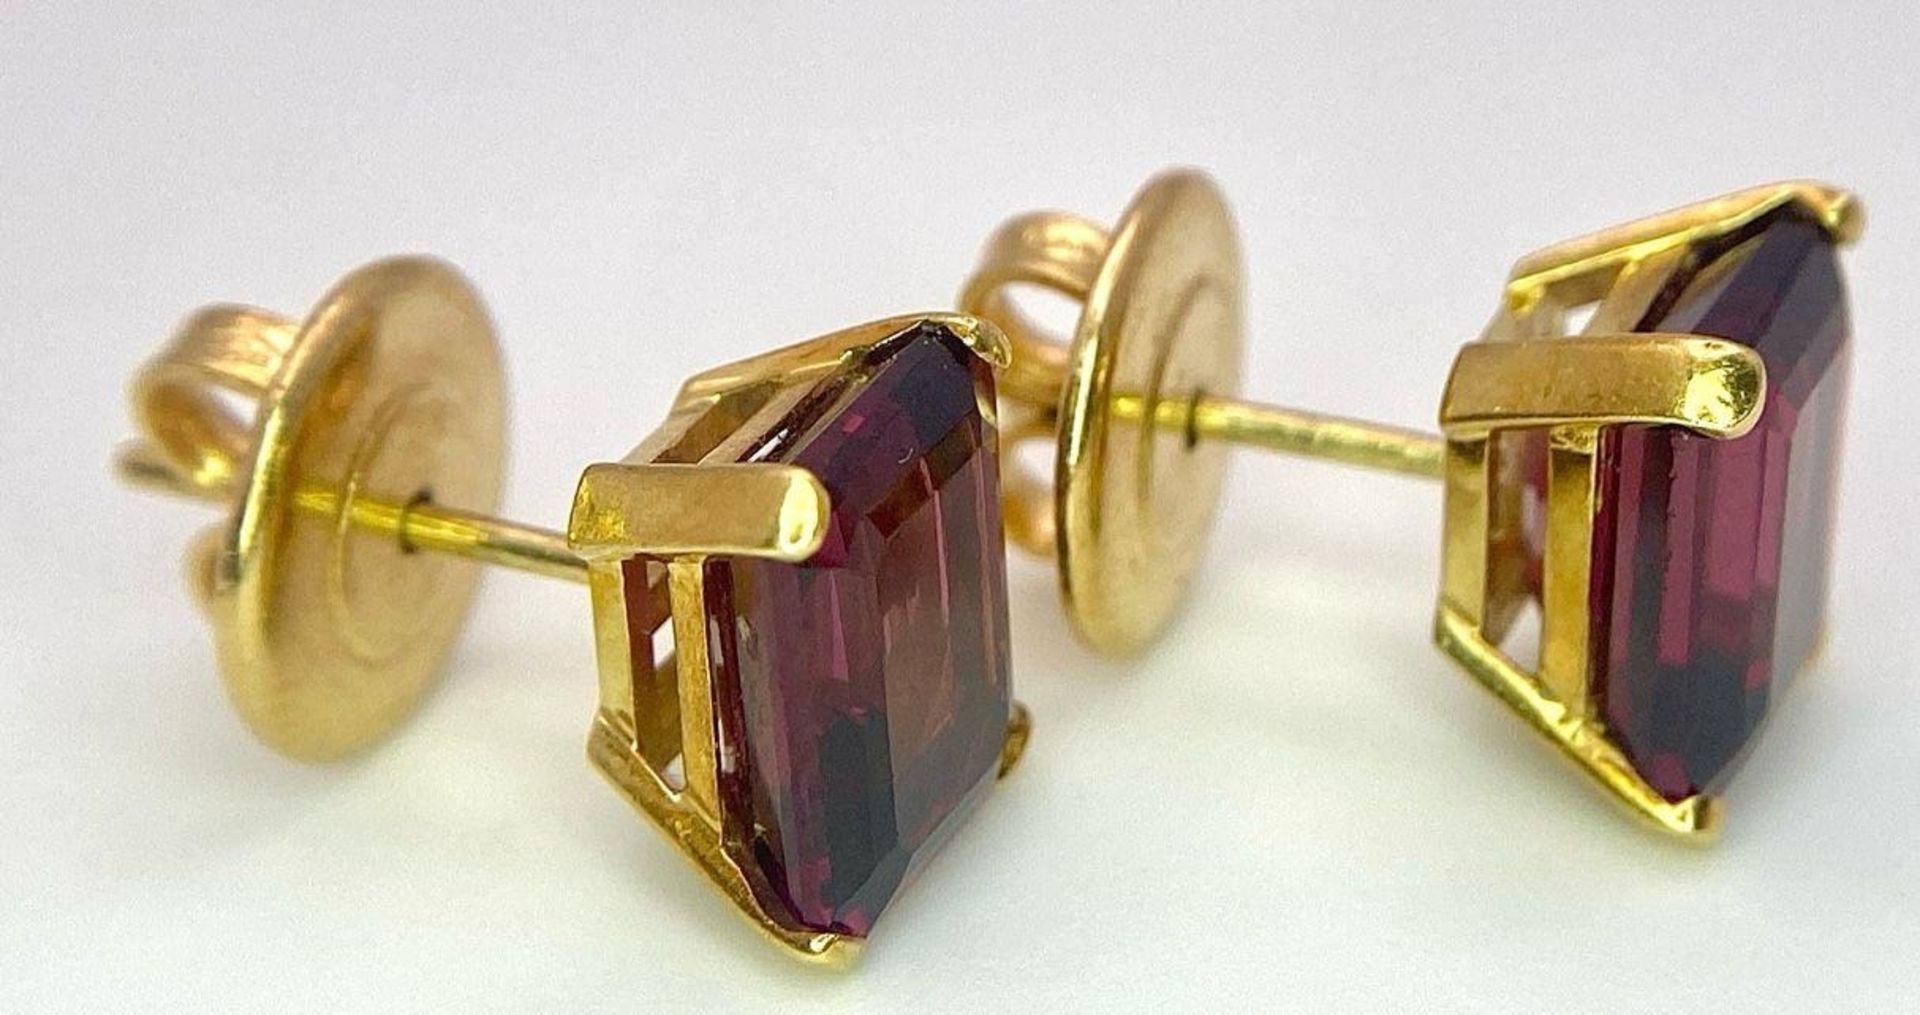 A Pair of 18K Yellow Gold and Alexandrite Earrings. Emerald cut alexandrite - 5ctw. 5.7g total - Image 4 of 8